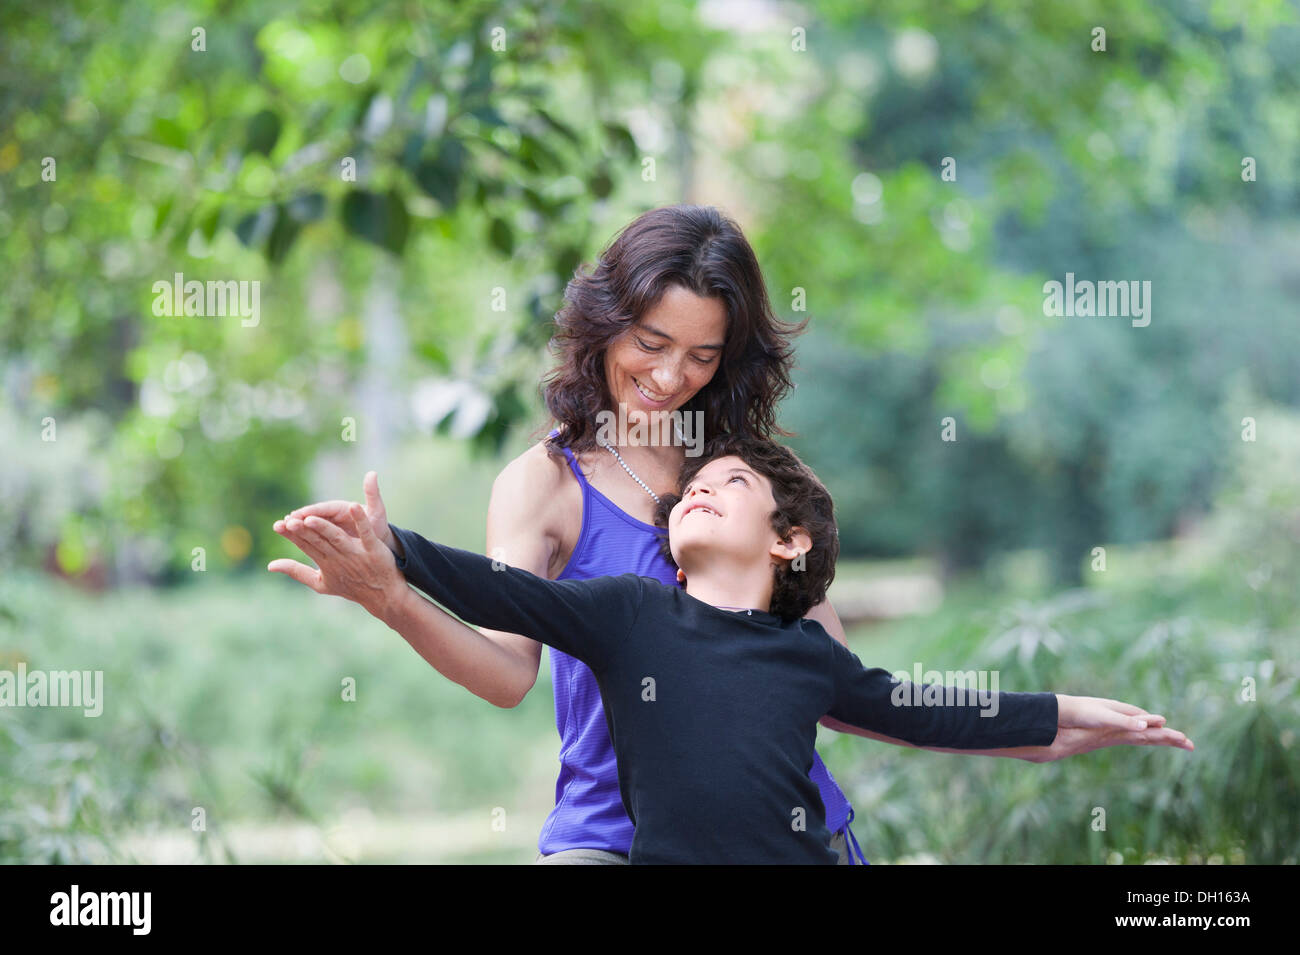 Hispanic mother and son playing outdoors Stock Photo